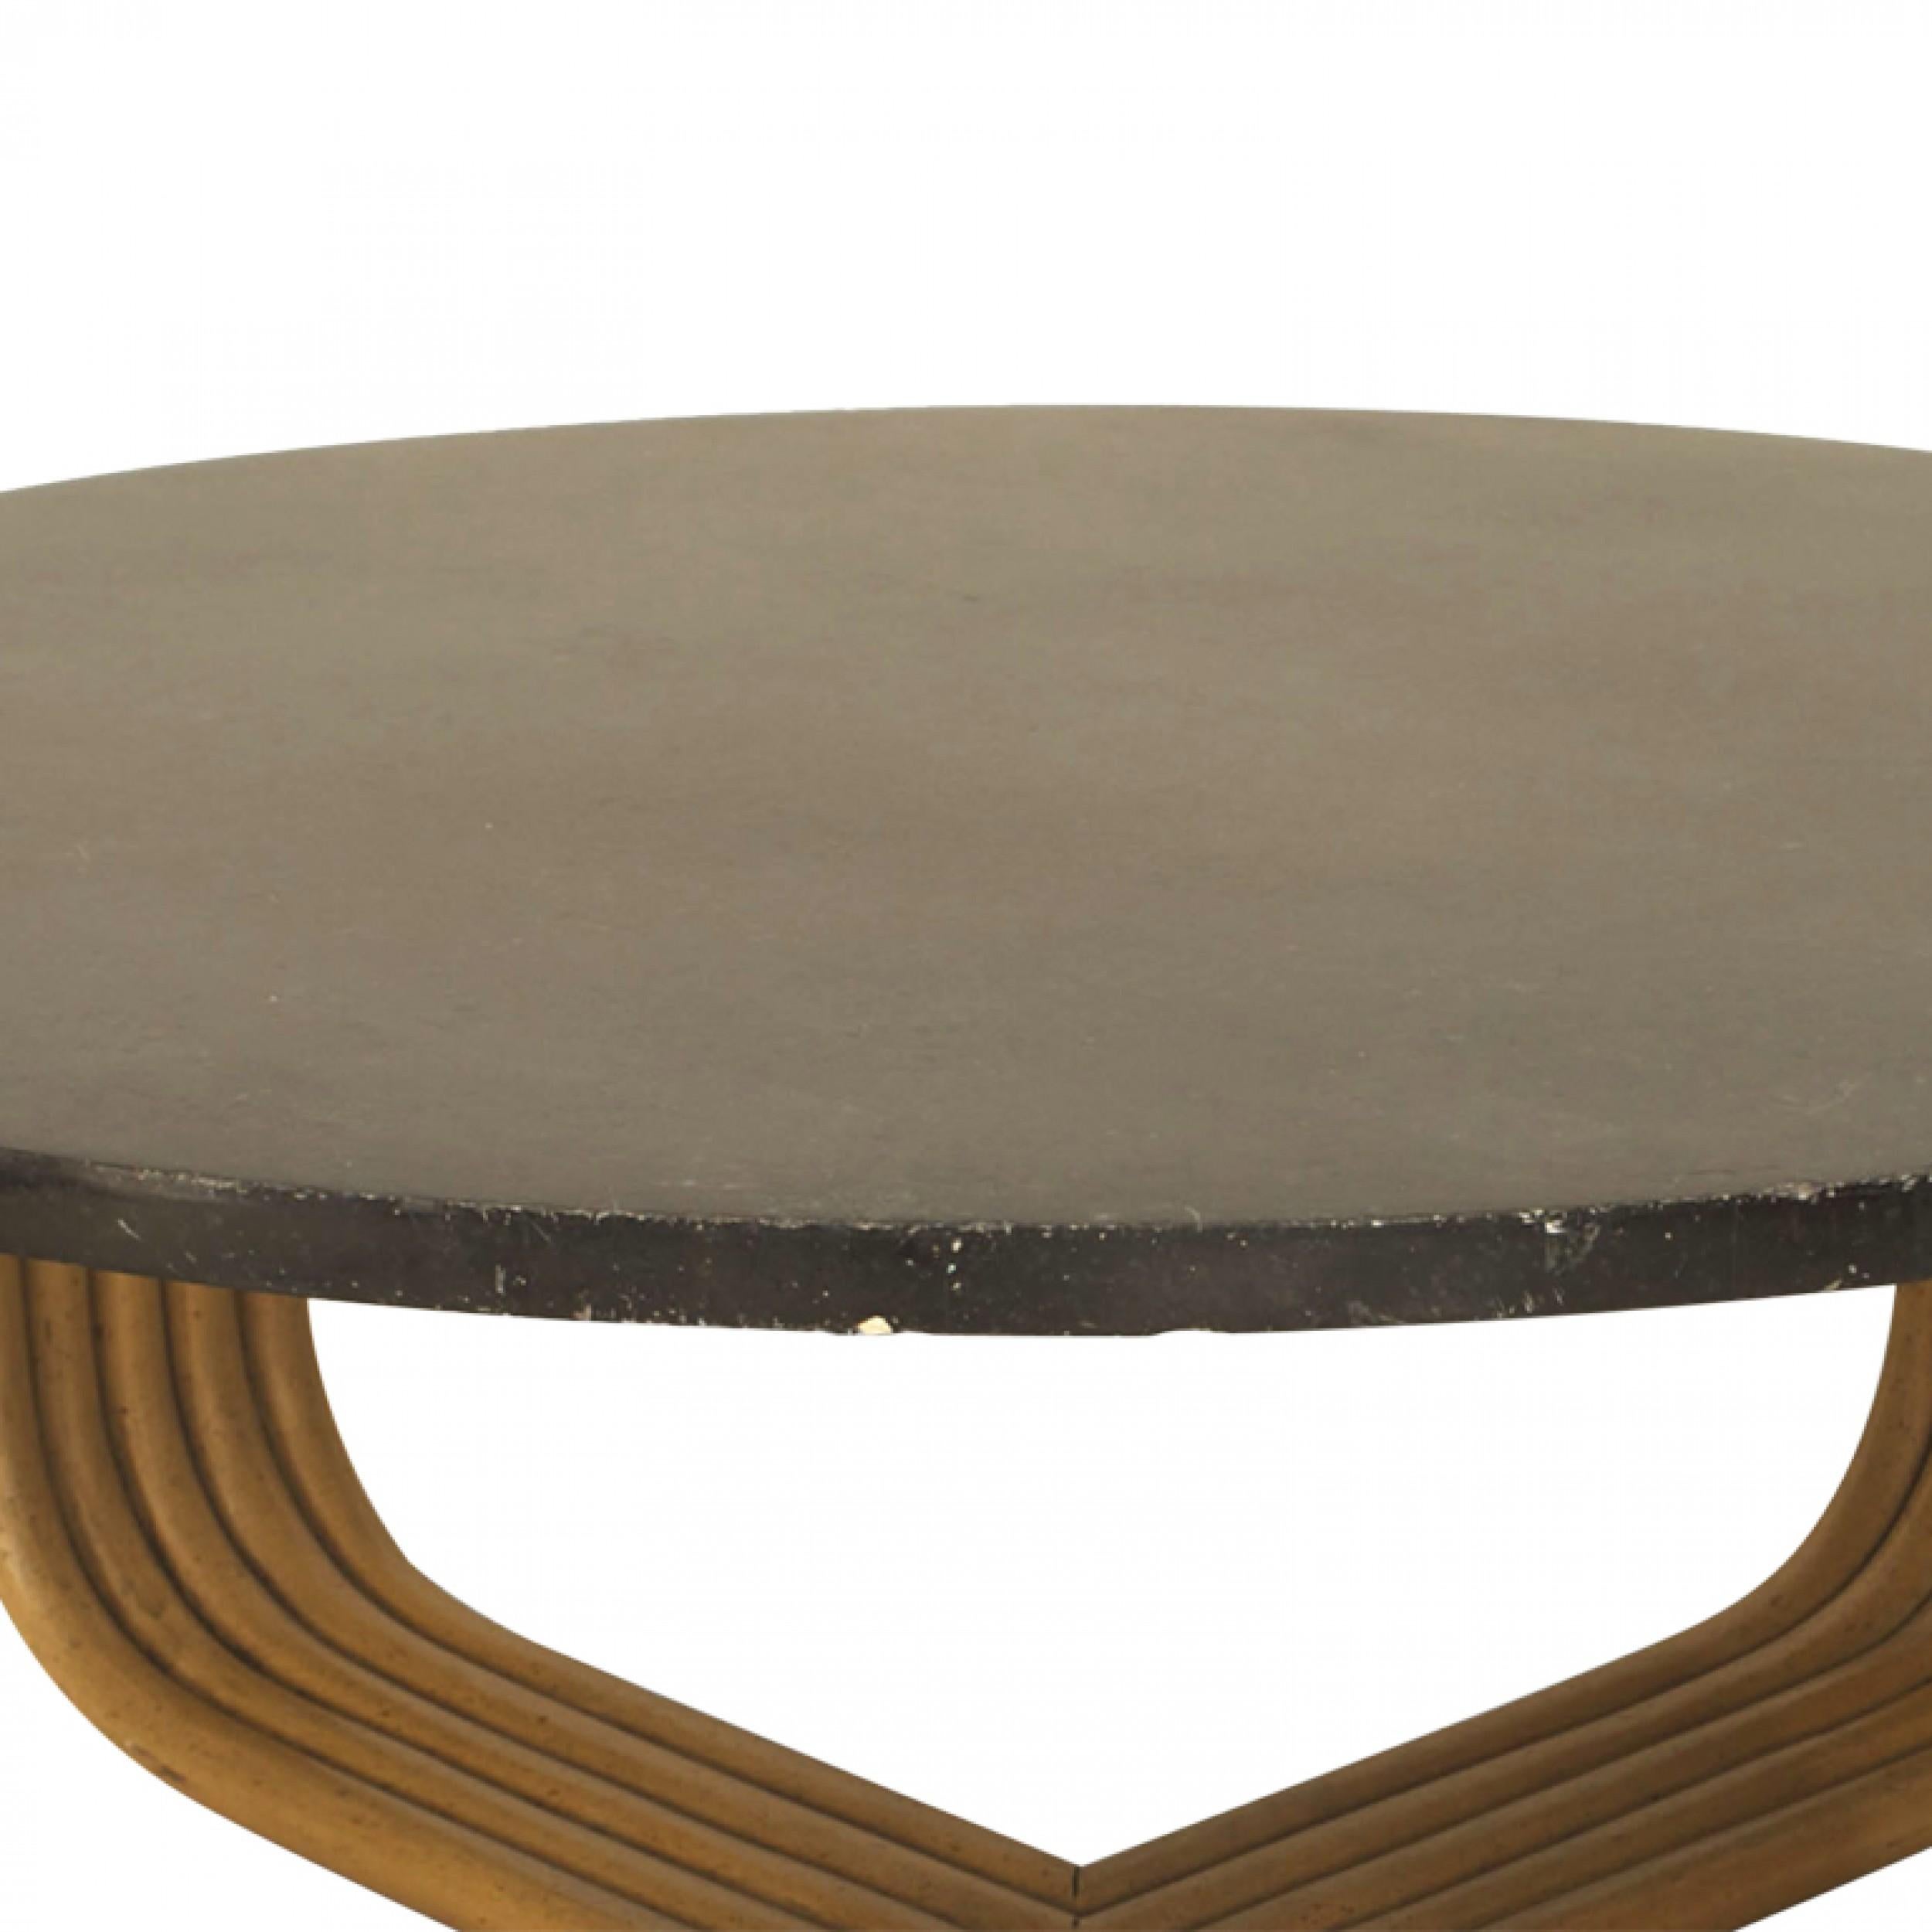 American Art Moderne (1930s) coffee table with a light beige painted faux bamboo base and a black bakelite inset top. (attributed to Paul Frankl)
